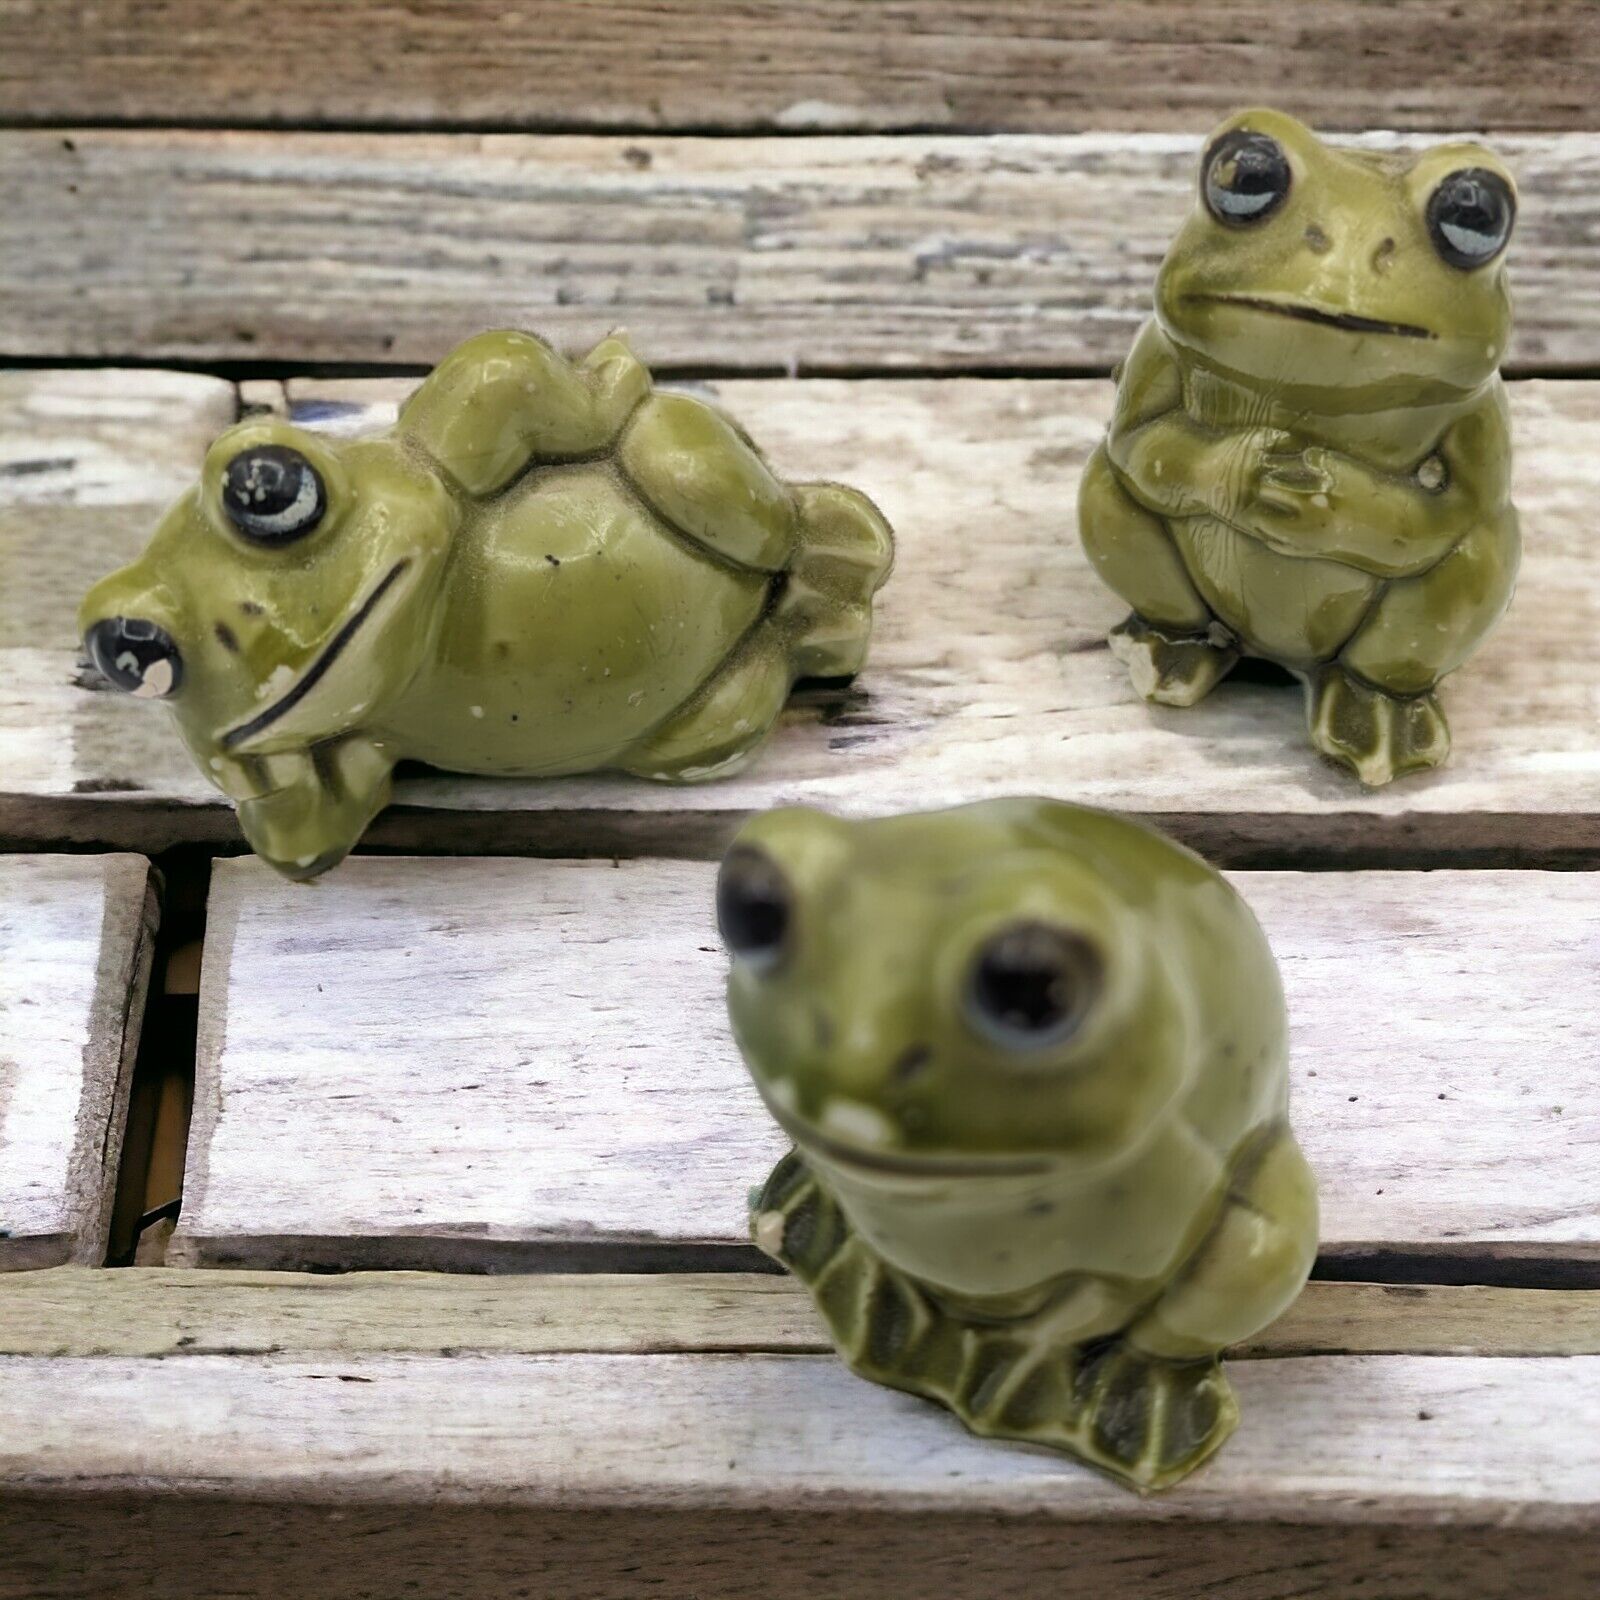 Frogs Toads Miniatures Figurines Plastic Vintage Hong Kong 3 pc - 1 has damage